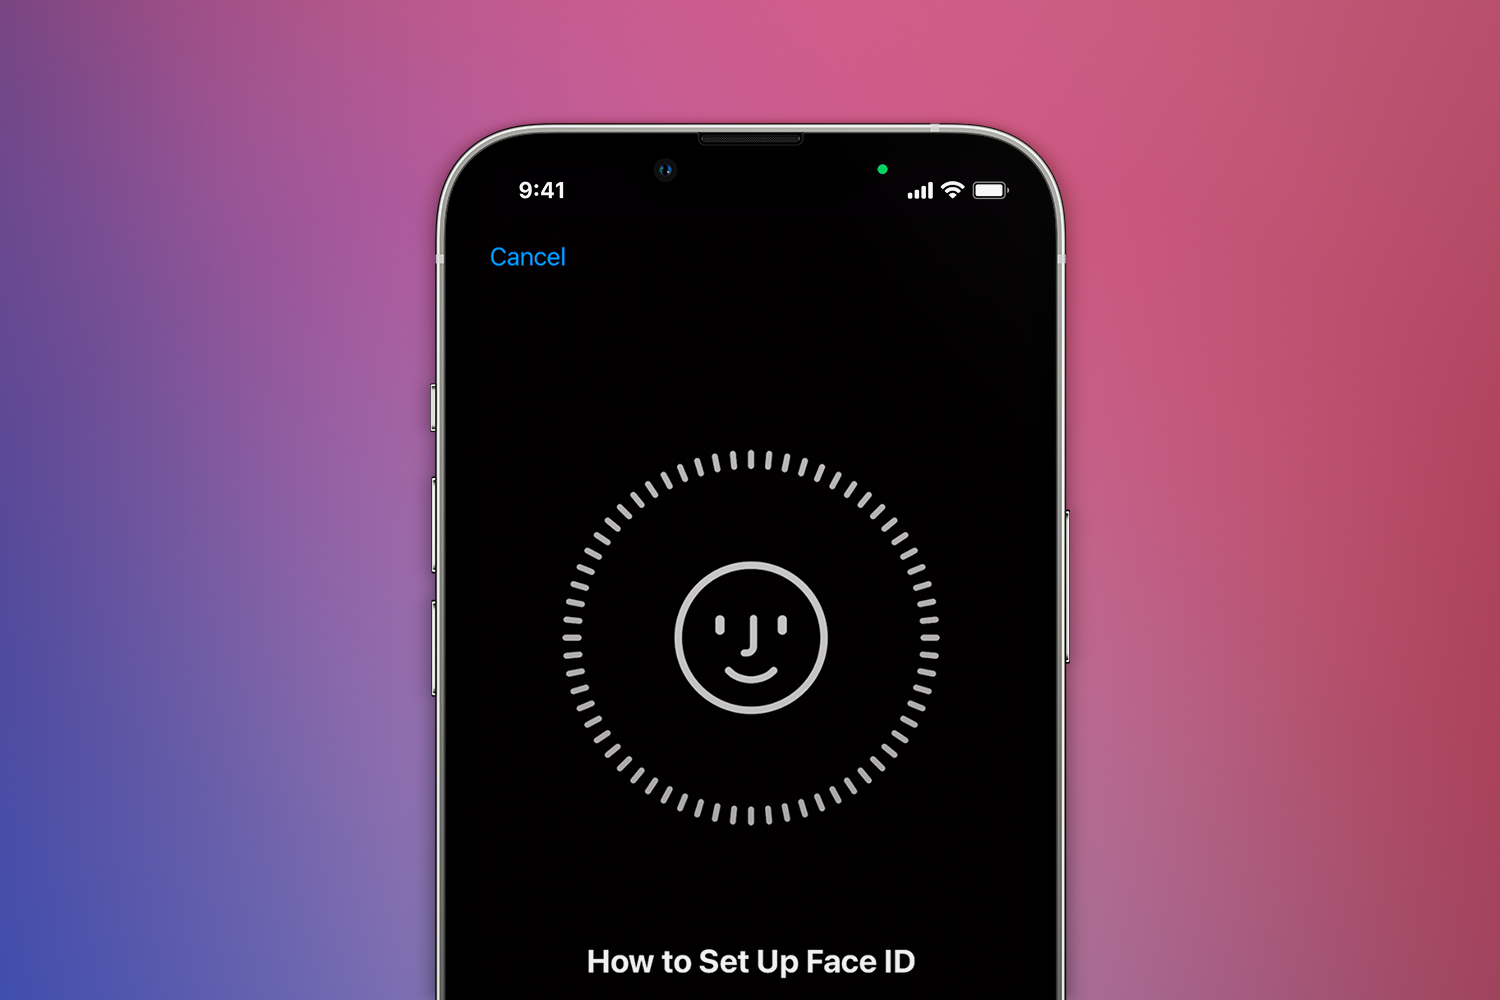 Here is how Face ID with a mask works to unlock your iPhone